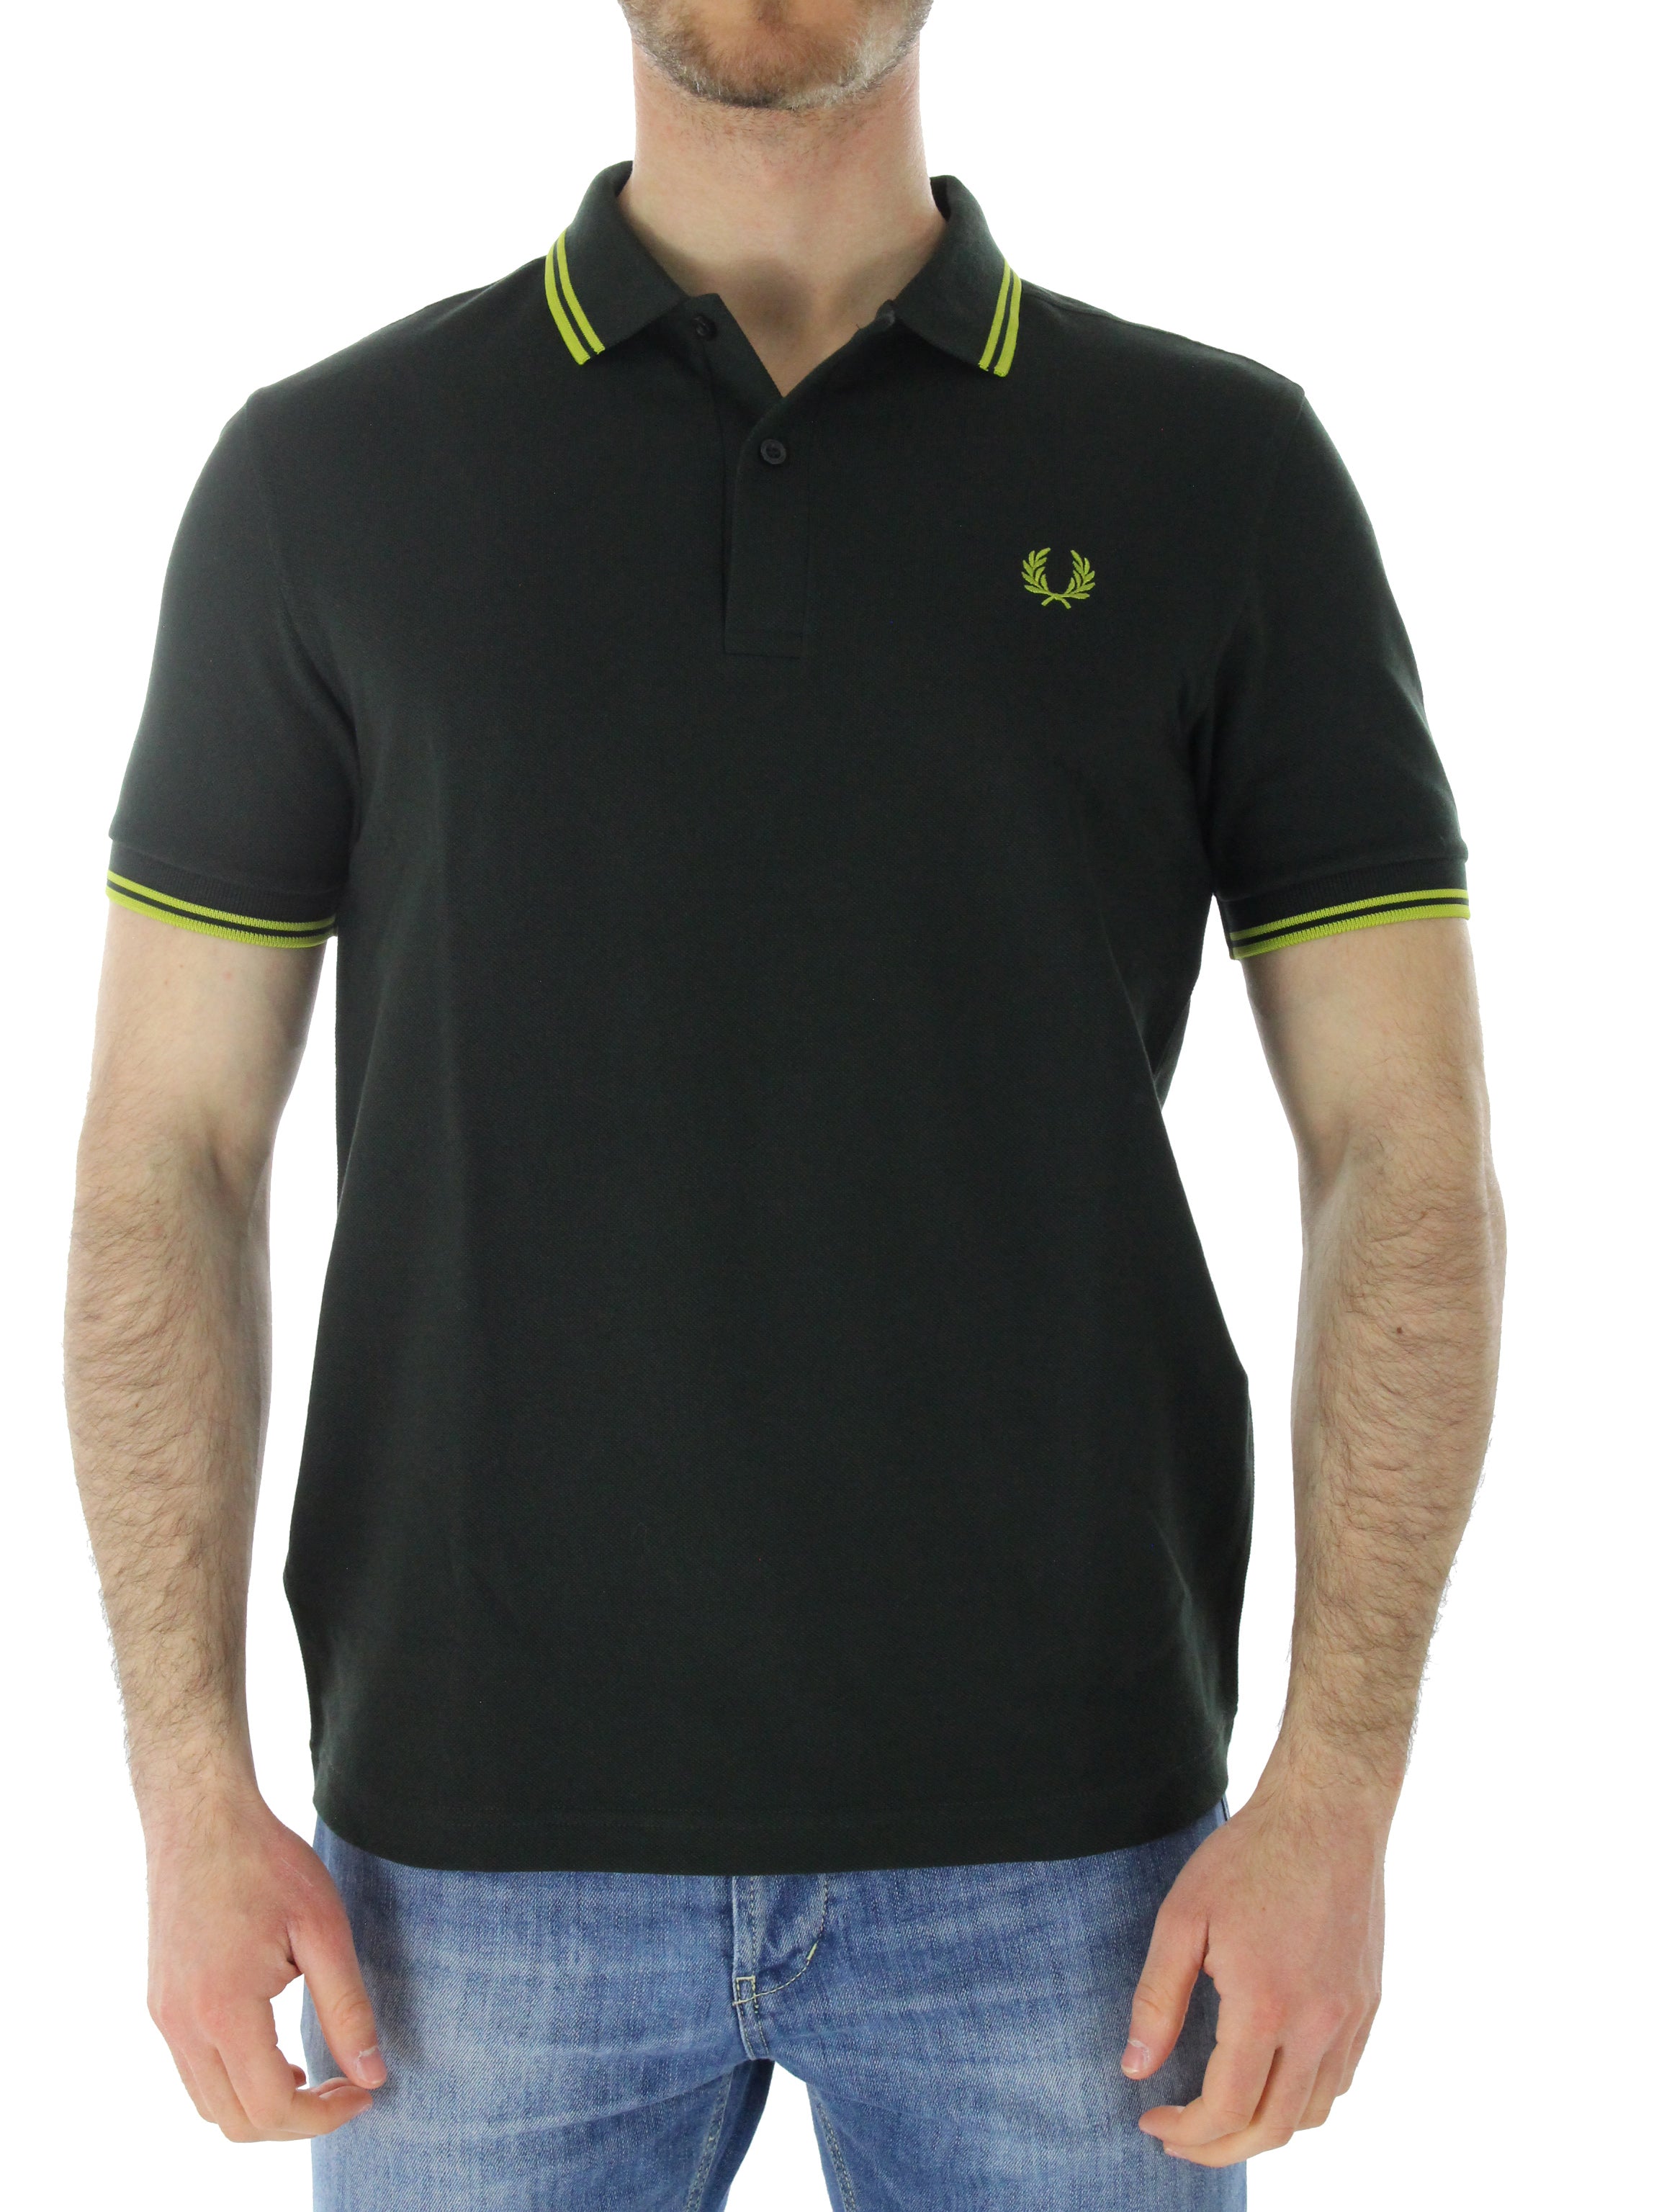 Fred perry polo righino verde